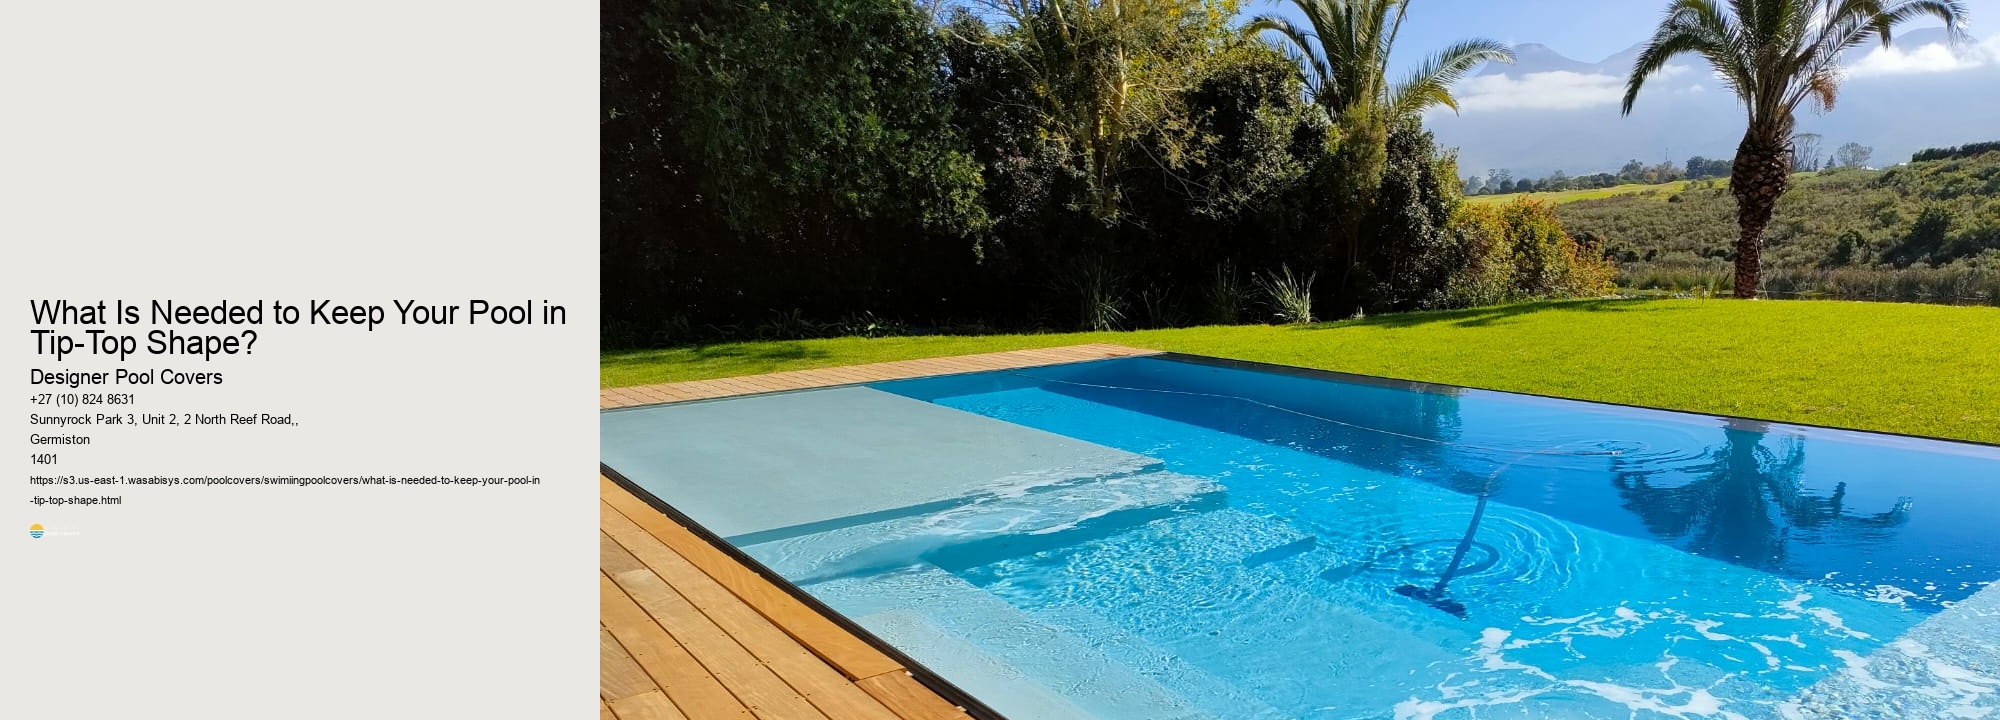 What Is Needed to Keep Your Pool in Tip-Top Shape? 